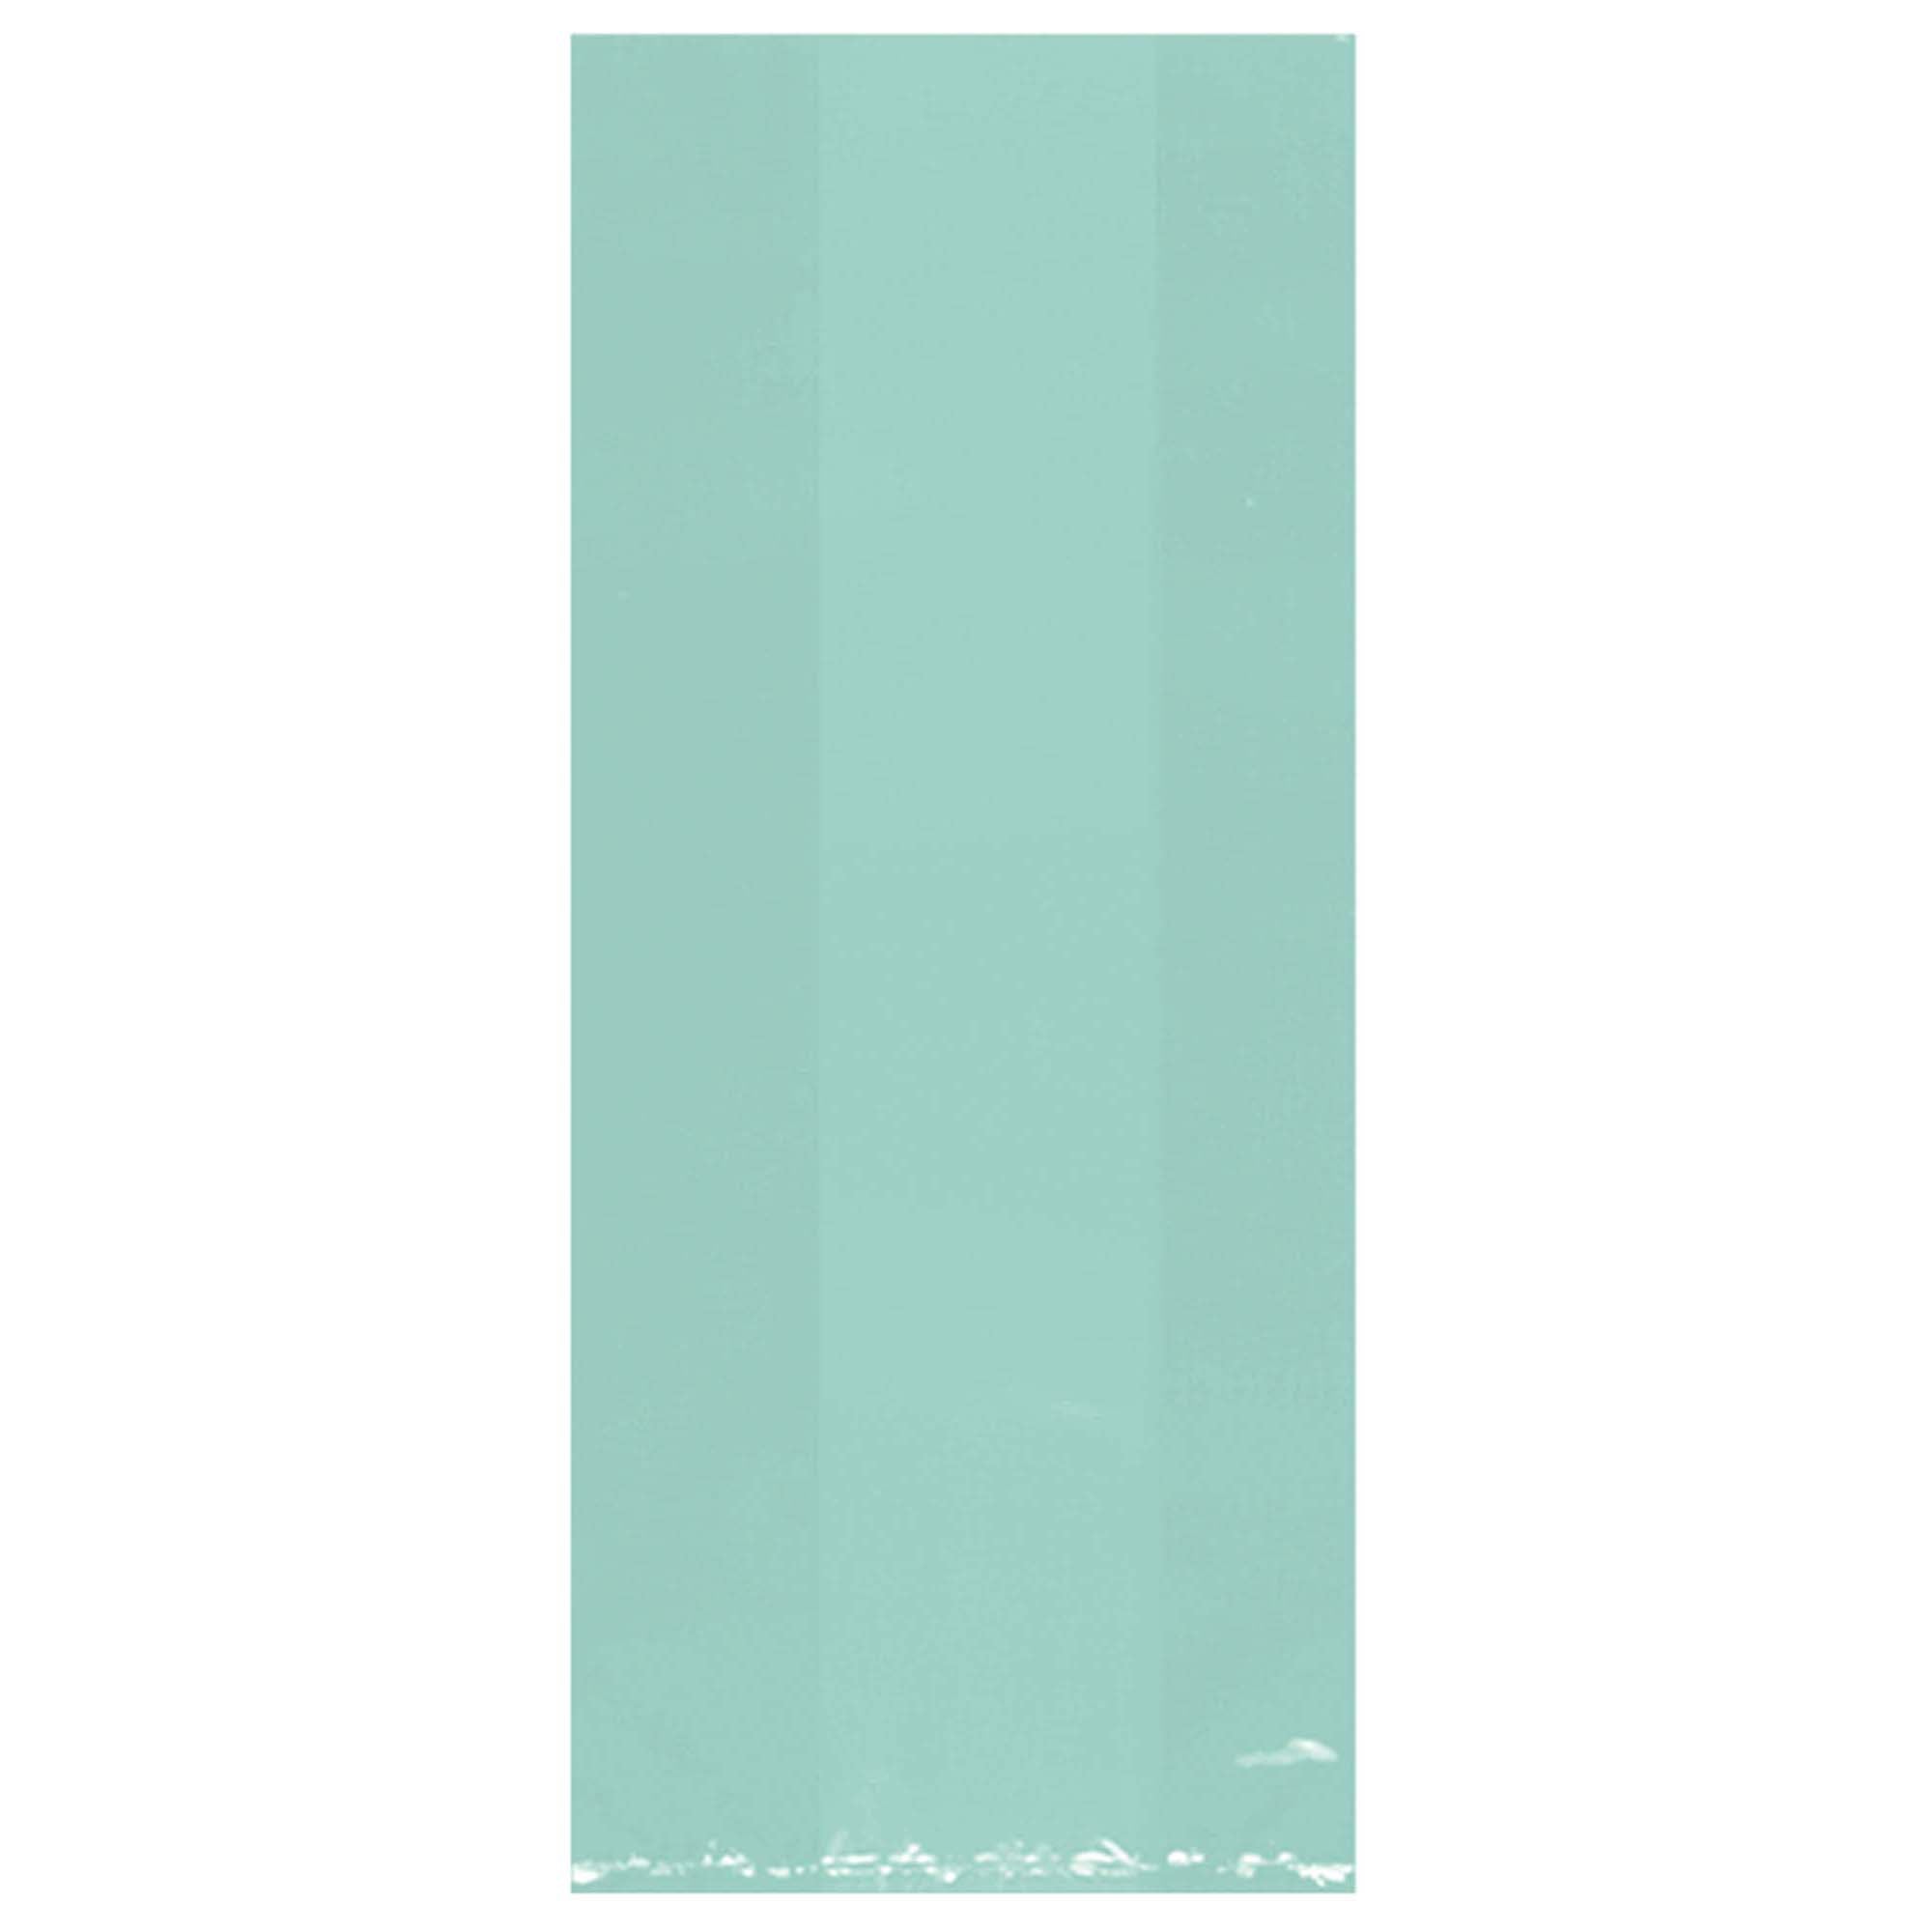 Robins Egg Blue Cello Bags 11.50in, 25pcs